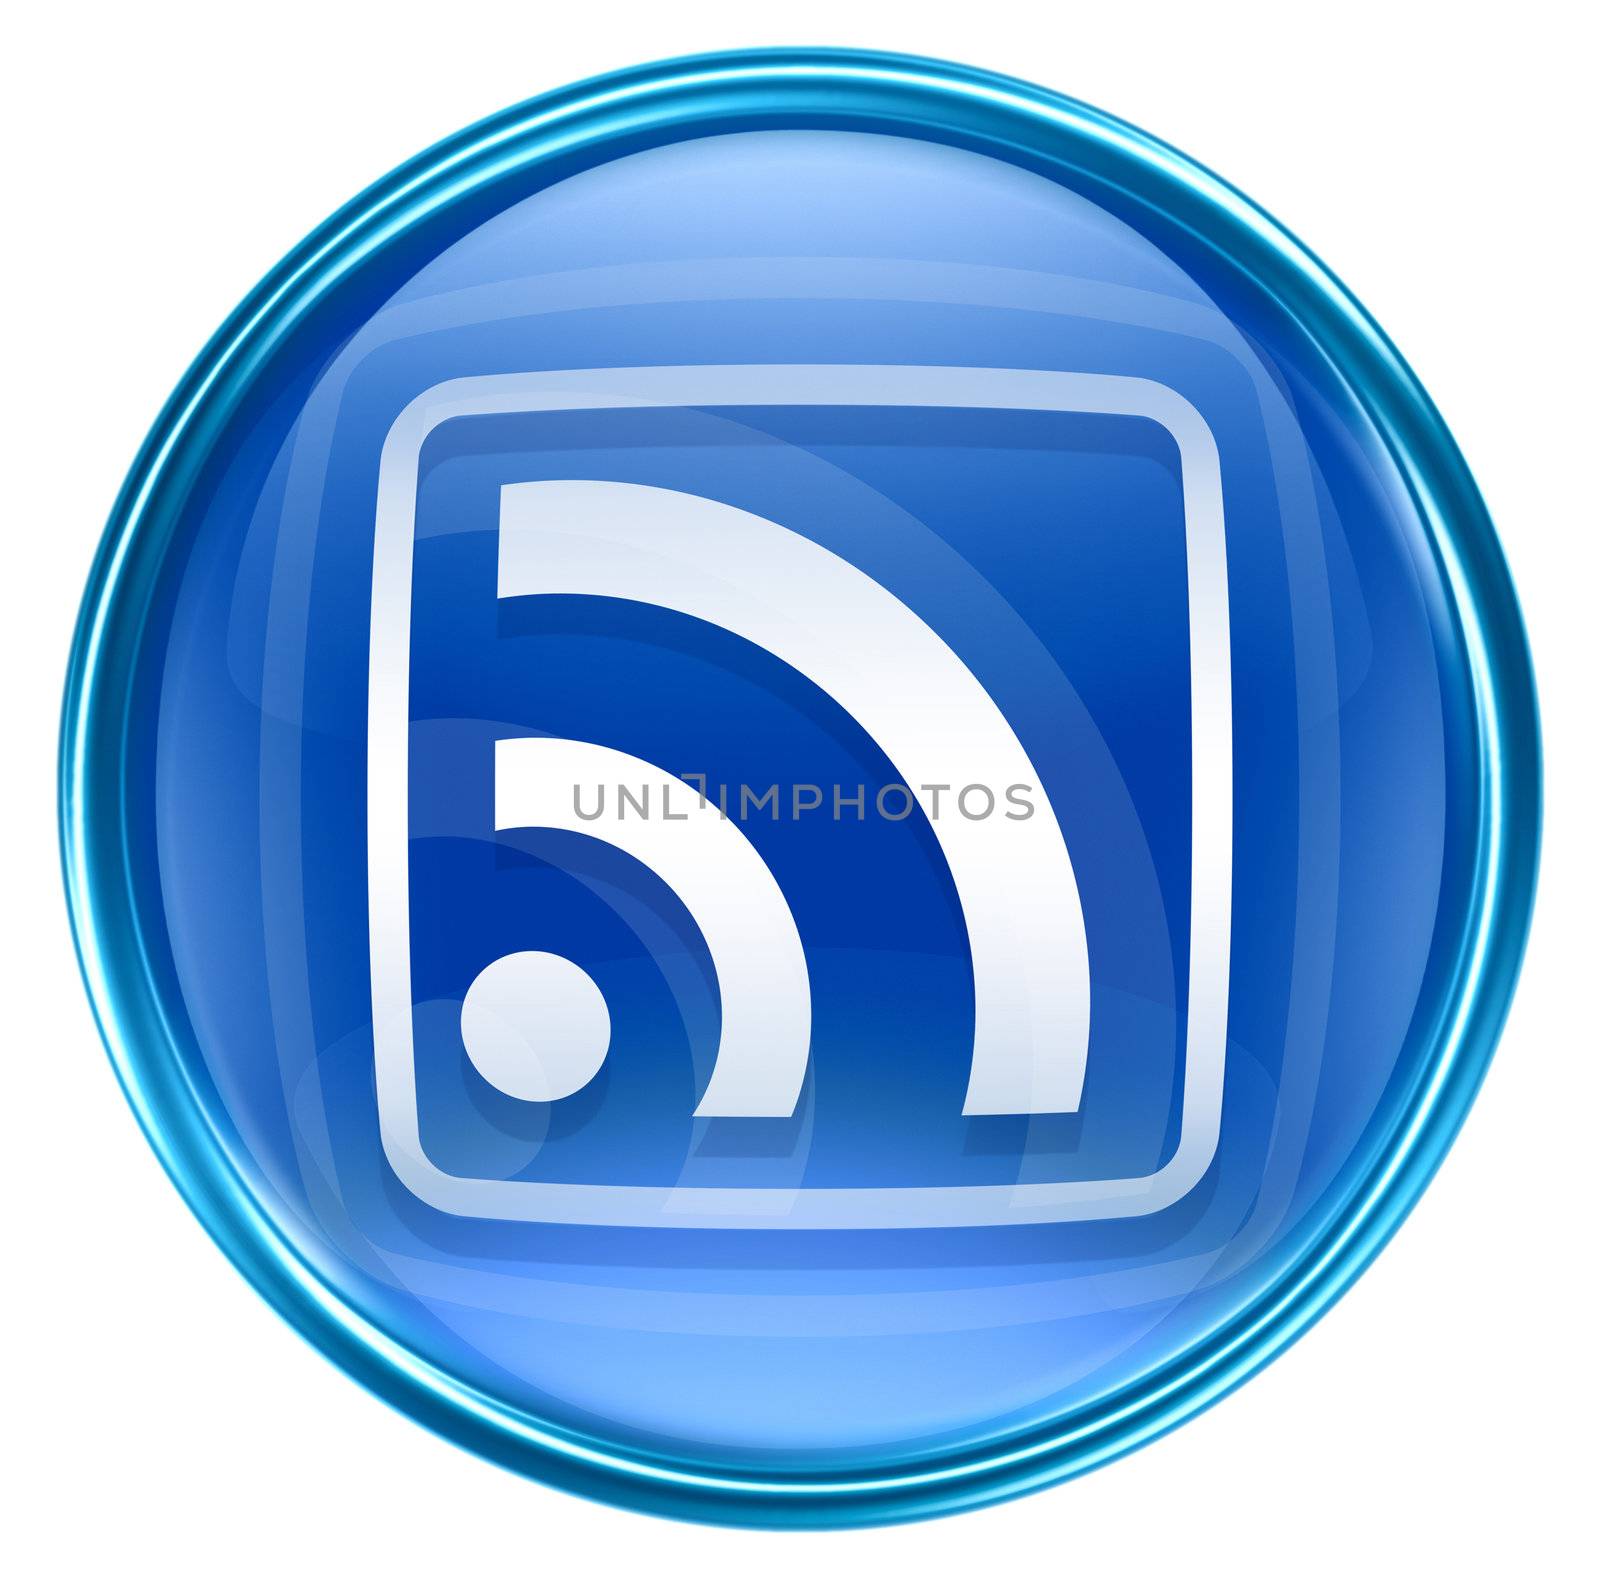 WI-FI icon blue, isolated on white background by zeffss